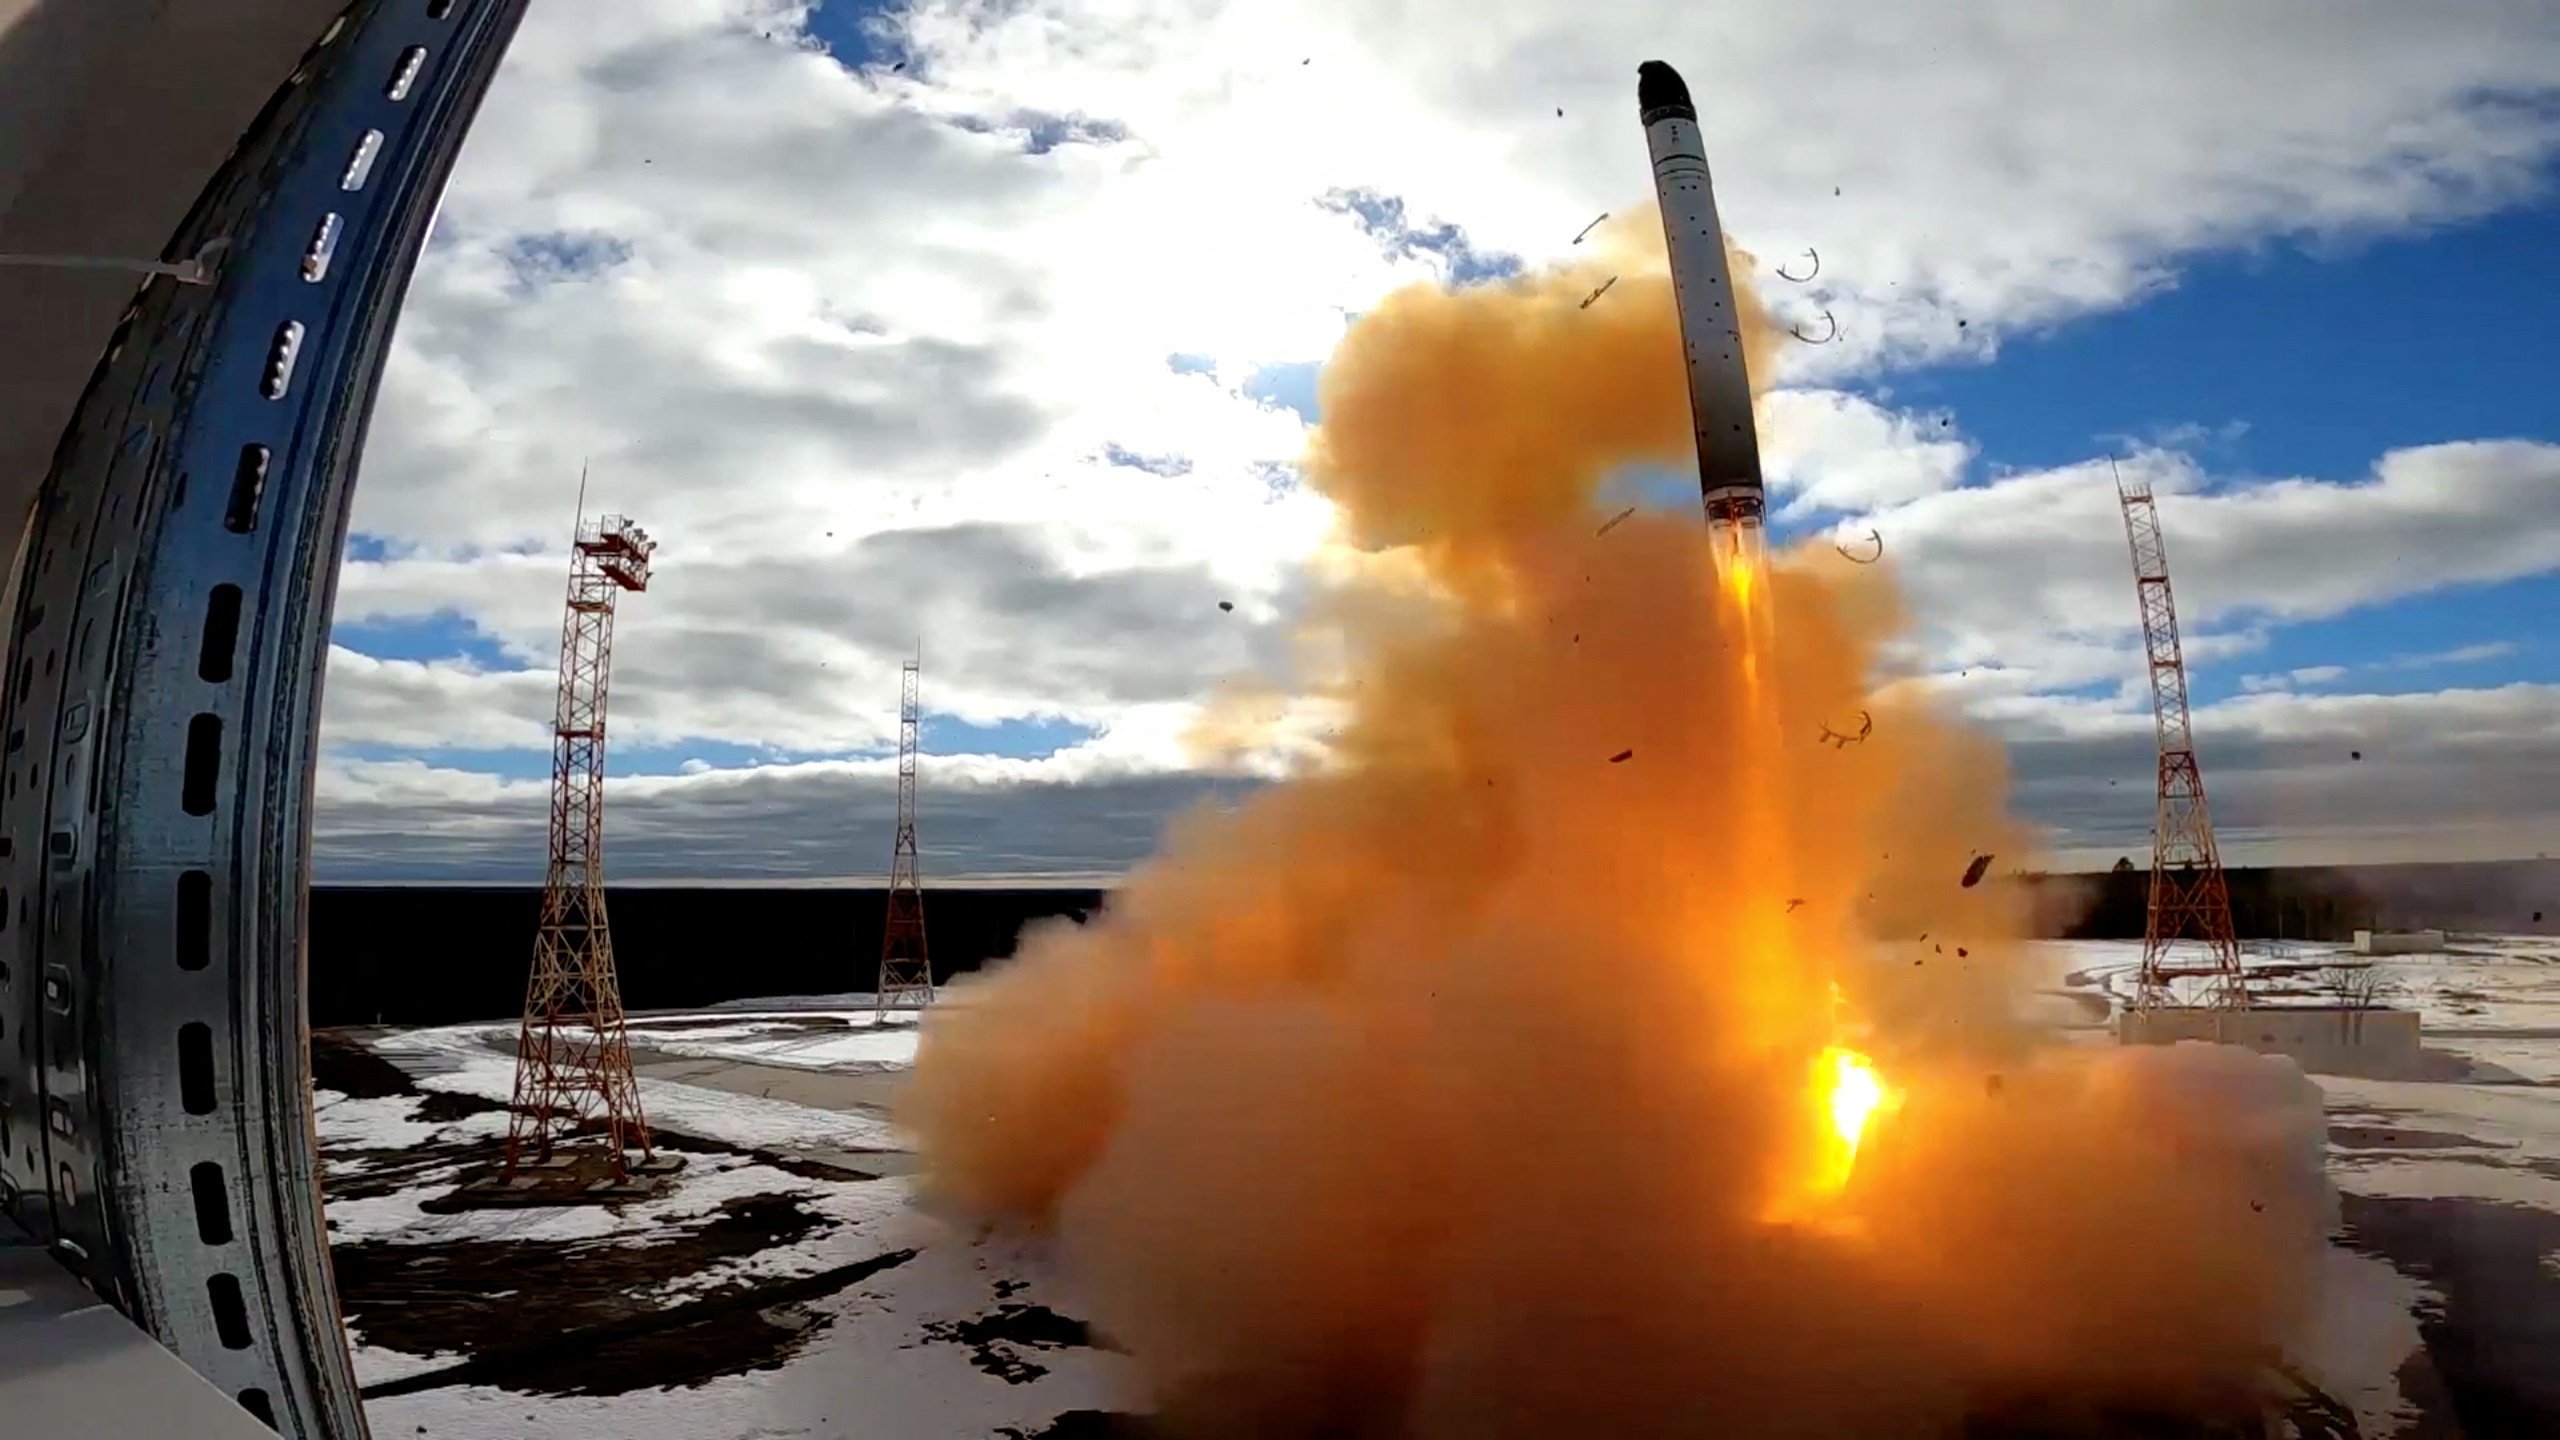 A Sarmat intercontinental ballistic missile is test-launched by the Russian military at the Plesetsk cosmodrome in Russia’s Arkhangelsk region in this still from a video released on April 20. The nuclear-capable missile has been dubbed “Satan 2” by analysts. Photo: Russian Defence Ministry/Reuters